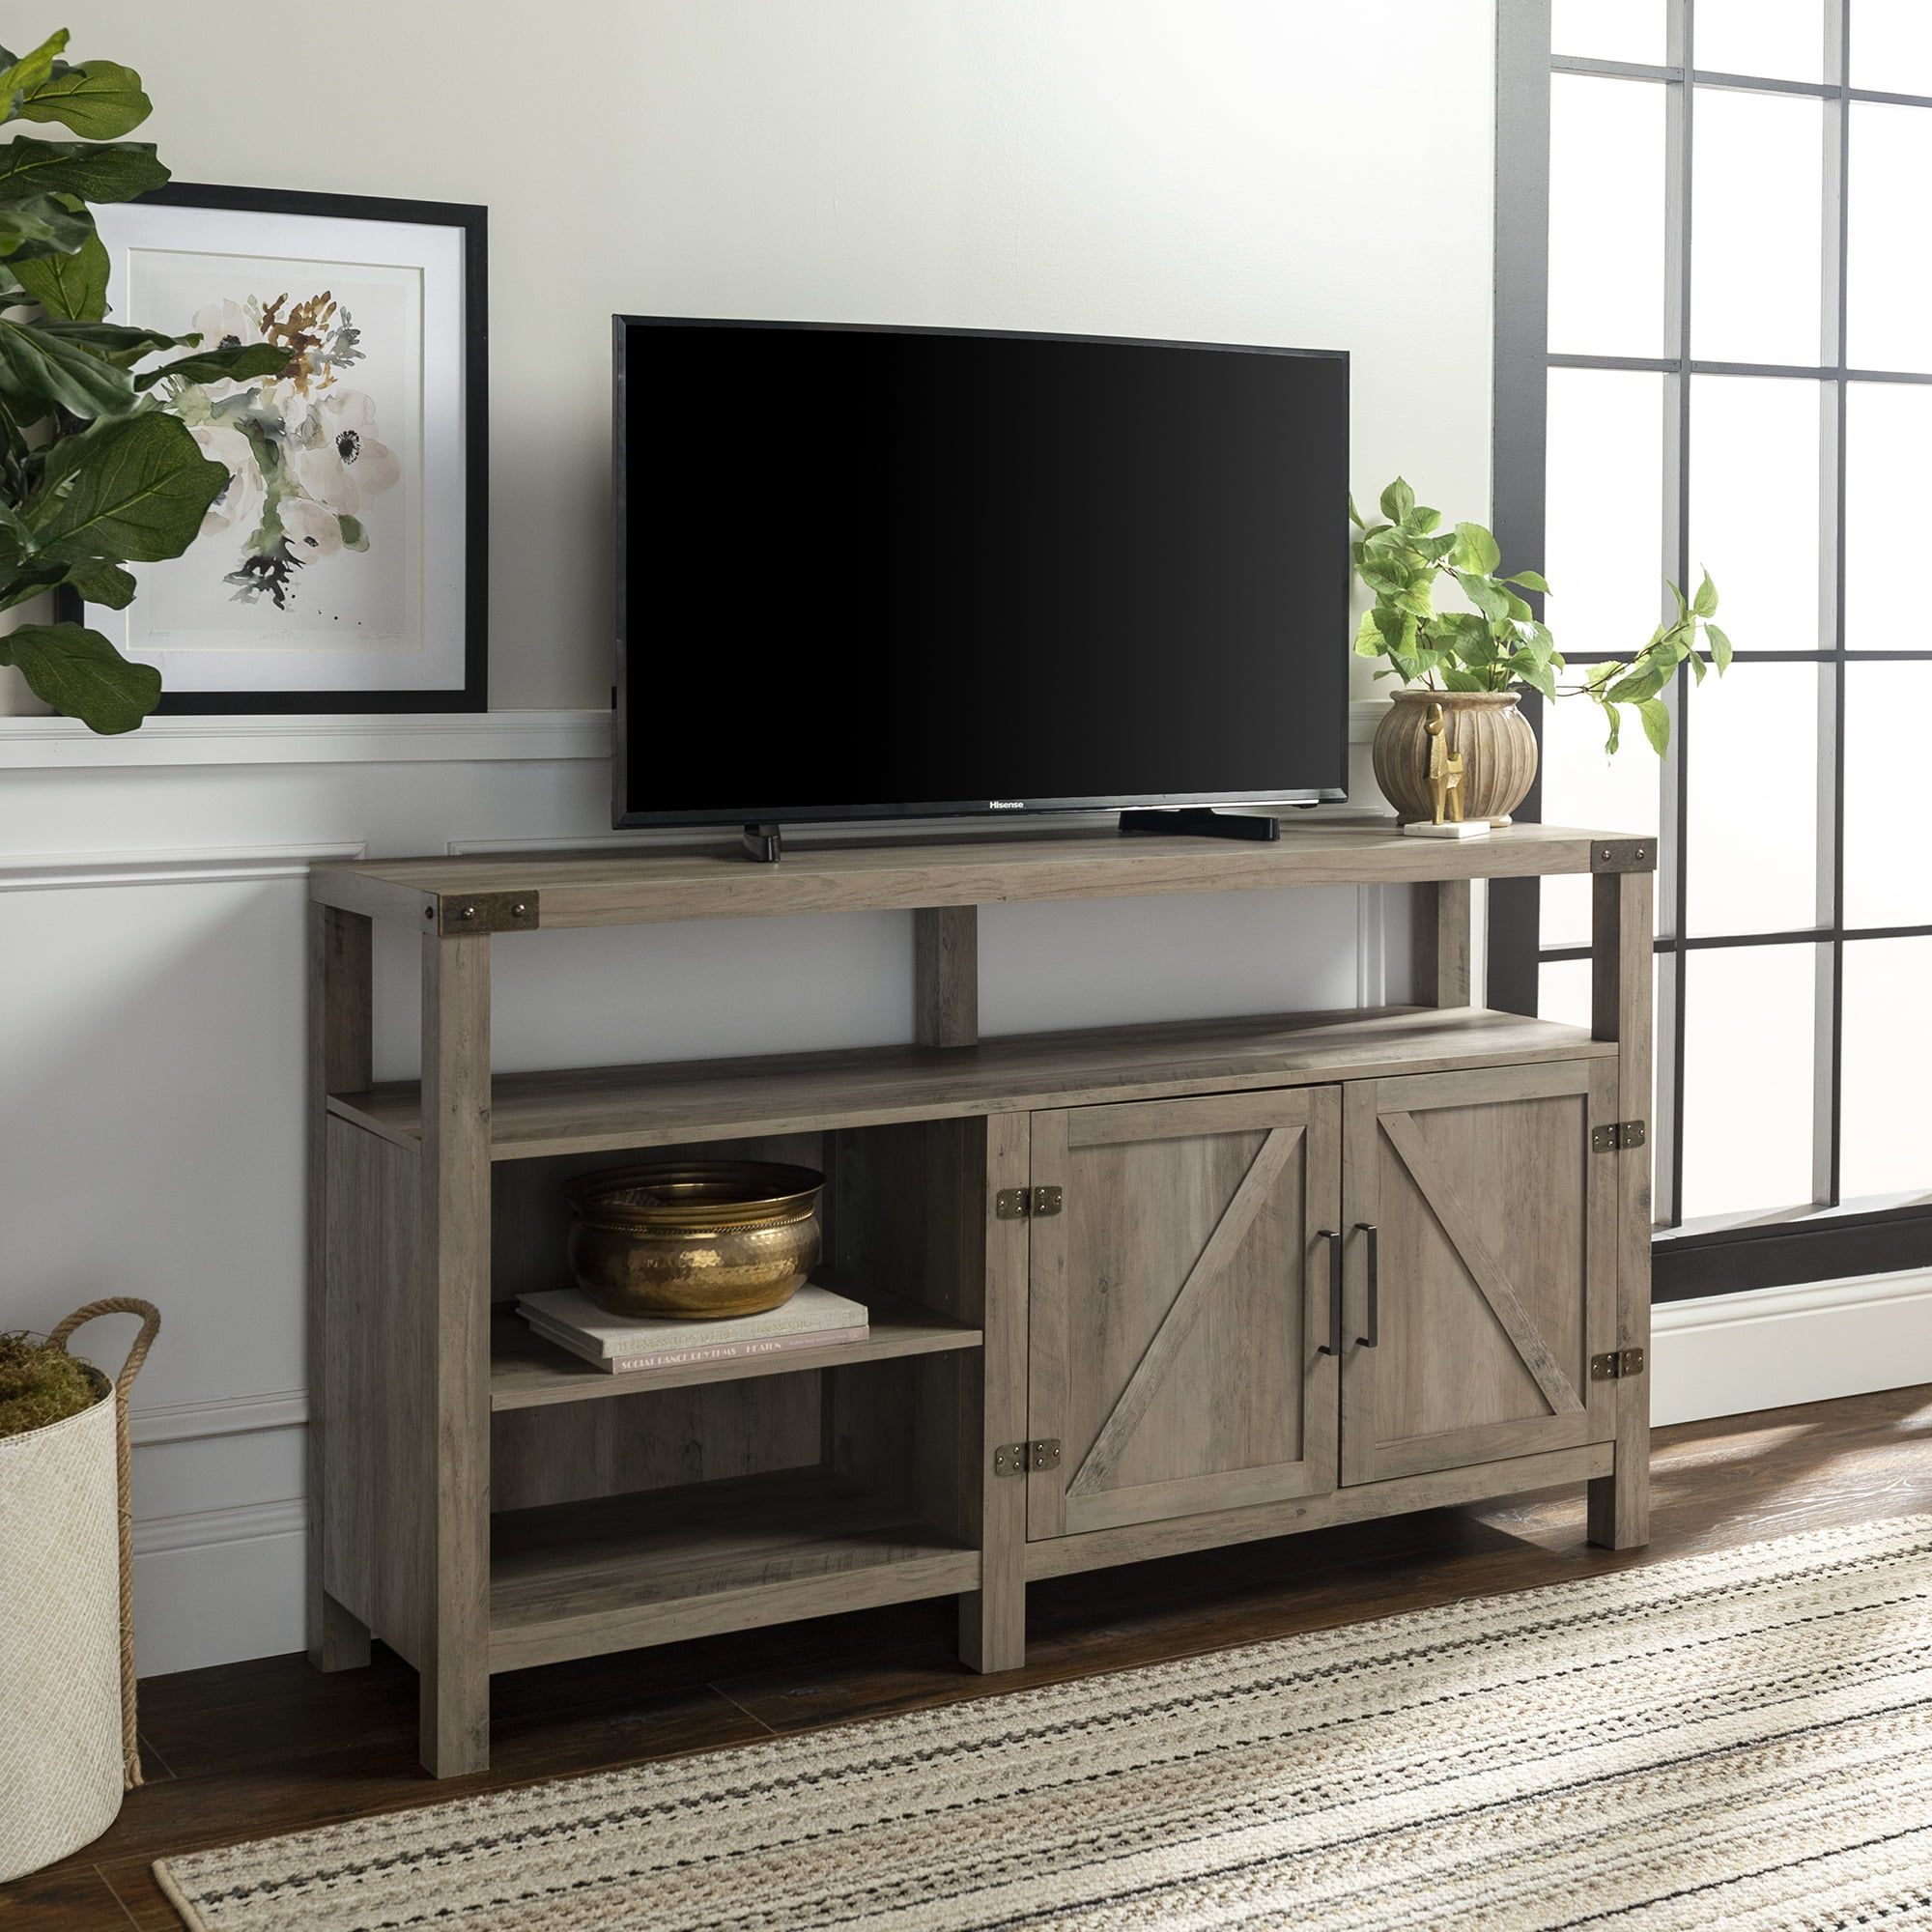 Manor Park Modern Farmhouse Tall Barn Door Tv Stand For Tv's Up To 64 Intended For Farmhouse Rattan Tv Stands (View 16 of 20)